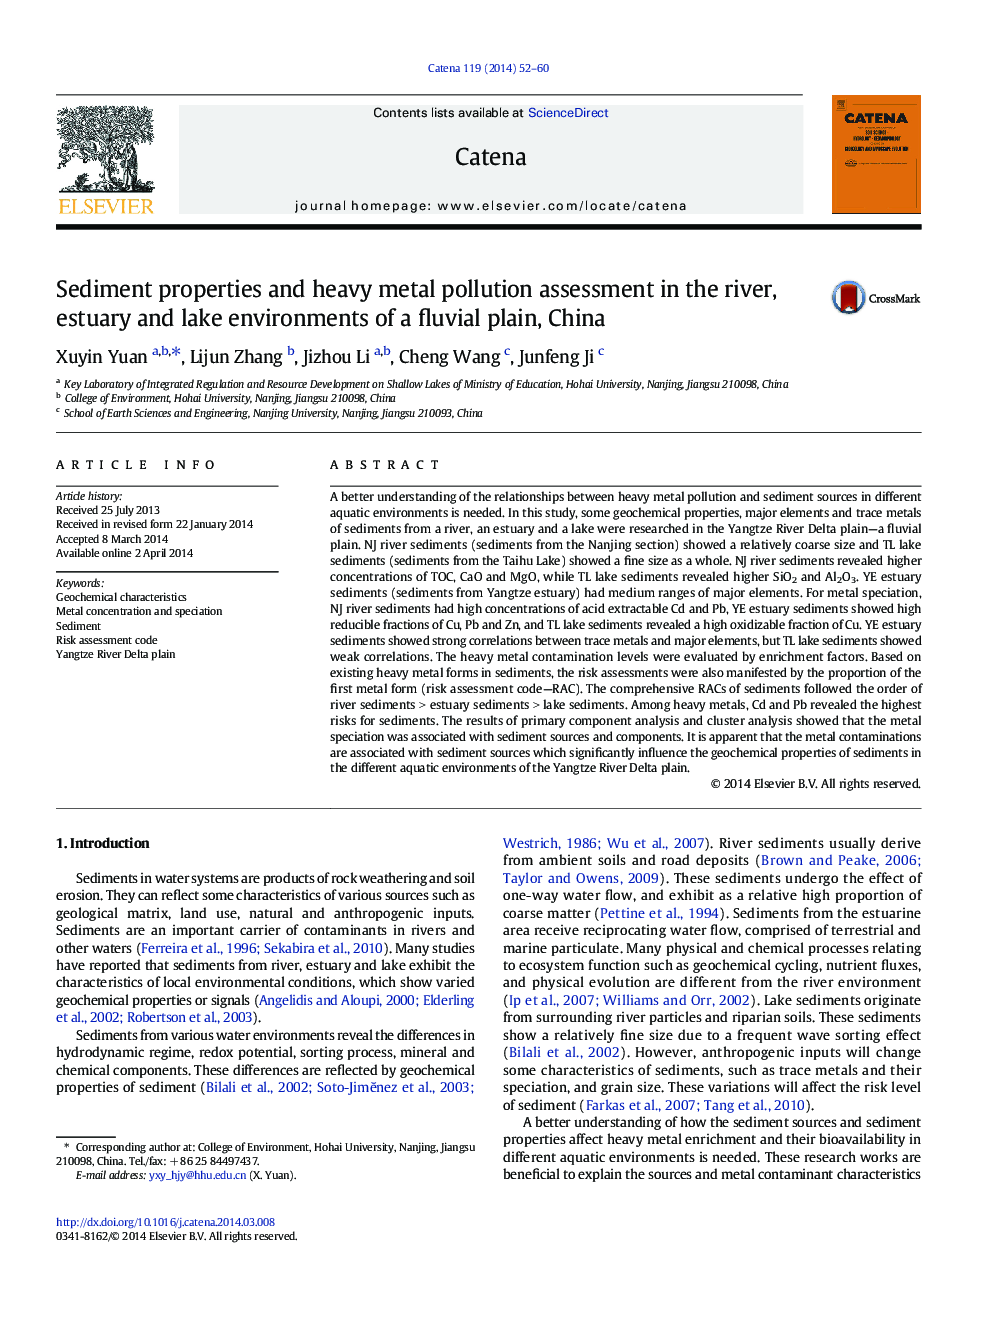 Sediment properties and heavy metal pollution assessment in the river, estuary and lake environments of a fluvial plain, China